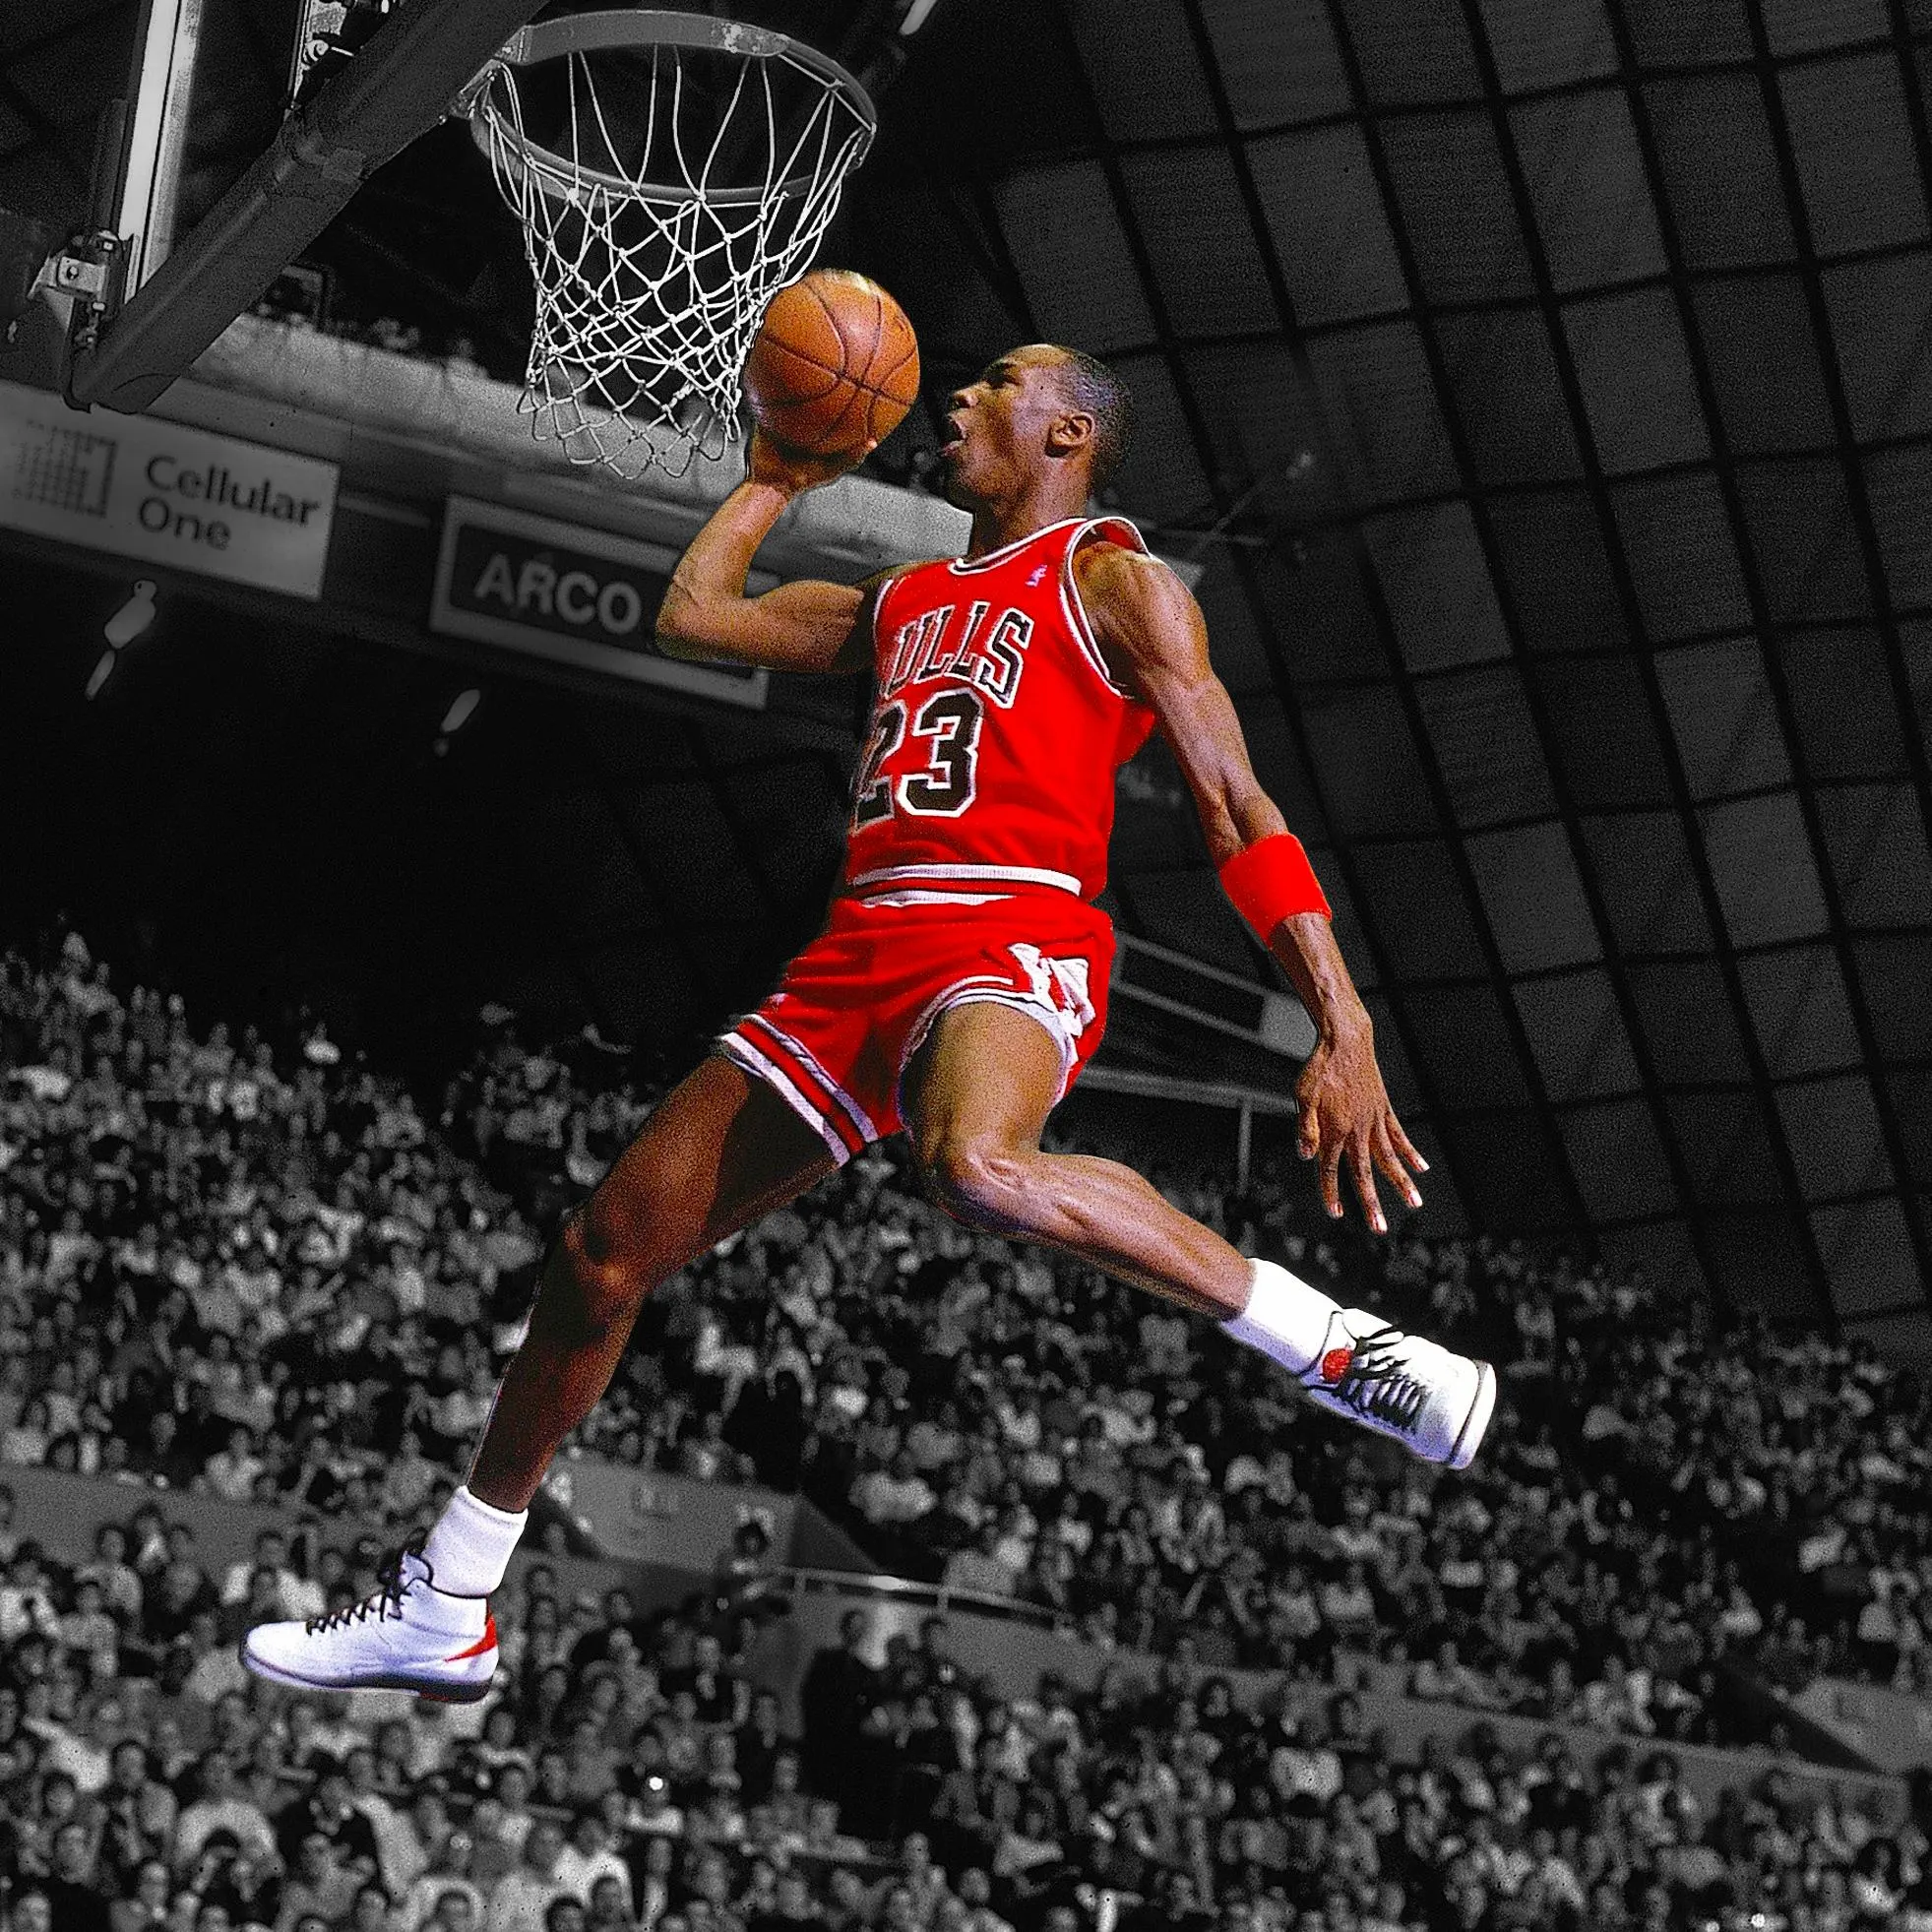 "What I could have done" -- Michael Jordan